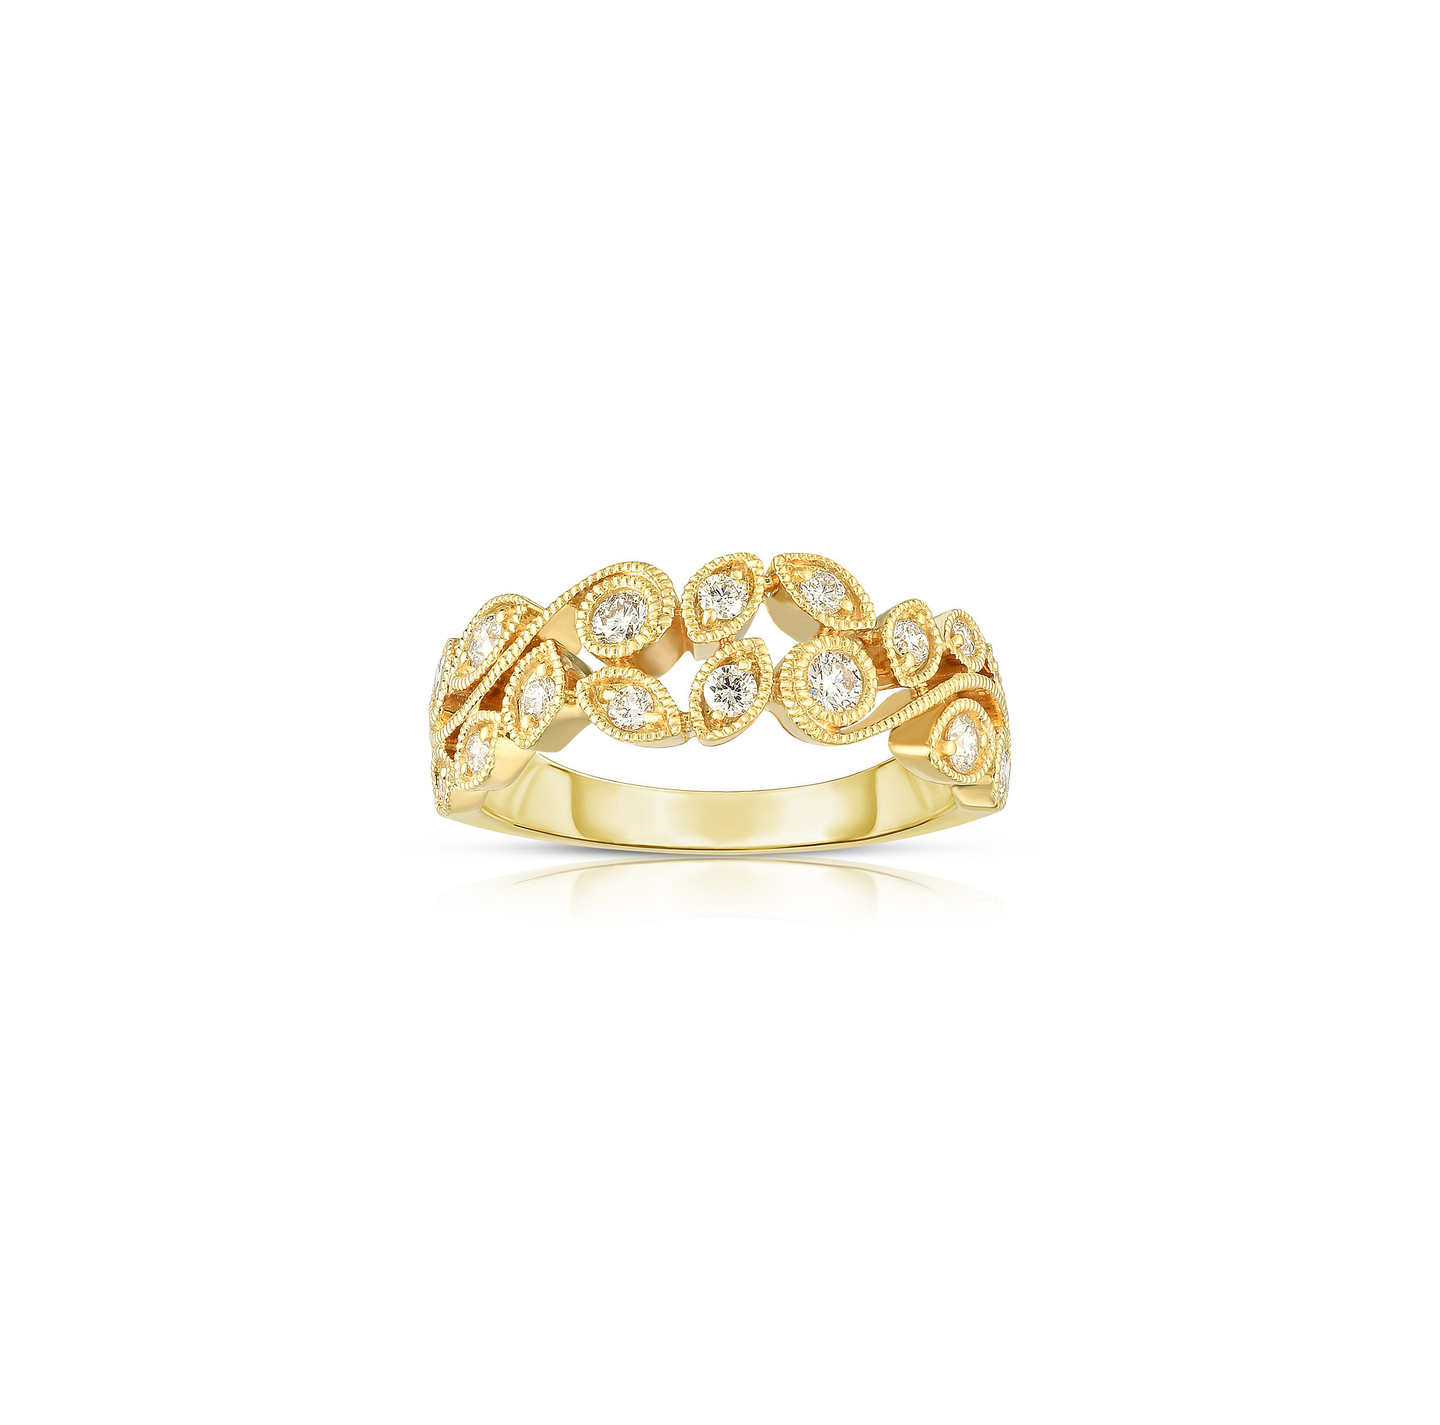 Sabel Collection 14K Yellow Gold Two Row Openwork Diamond Ring